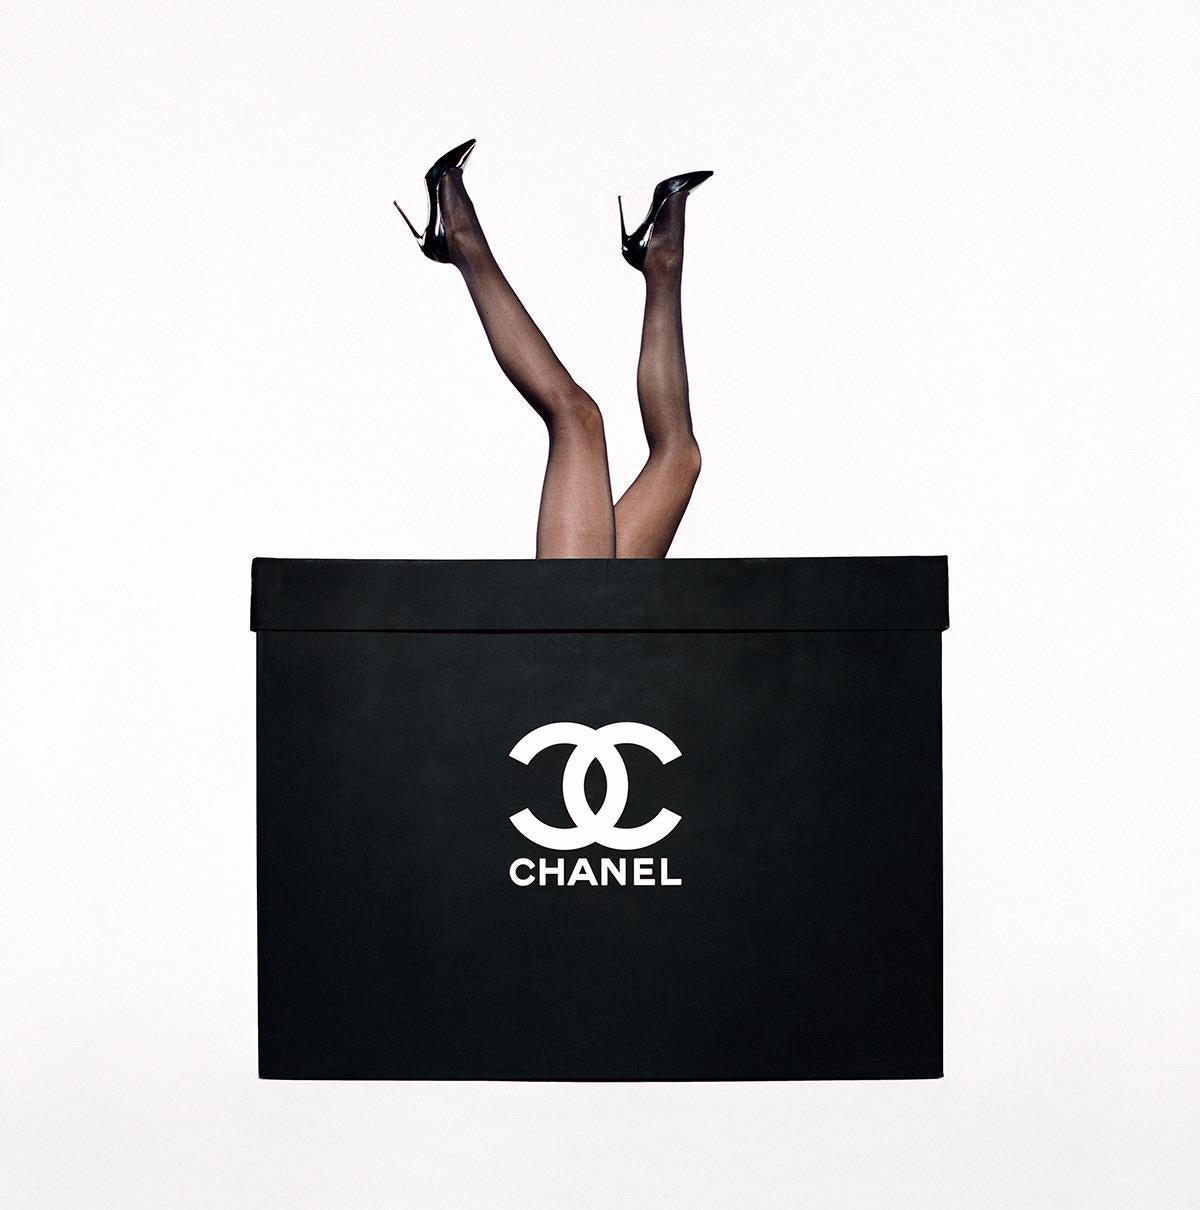 Tyler Shields - Chanel Legs, Photography 2016, Printed After